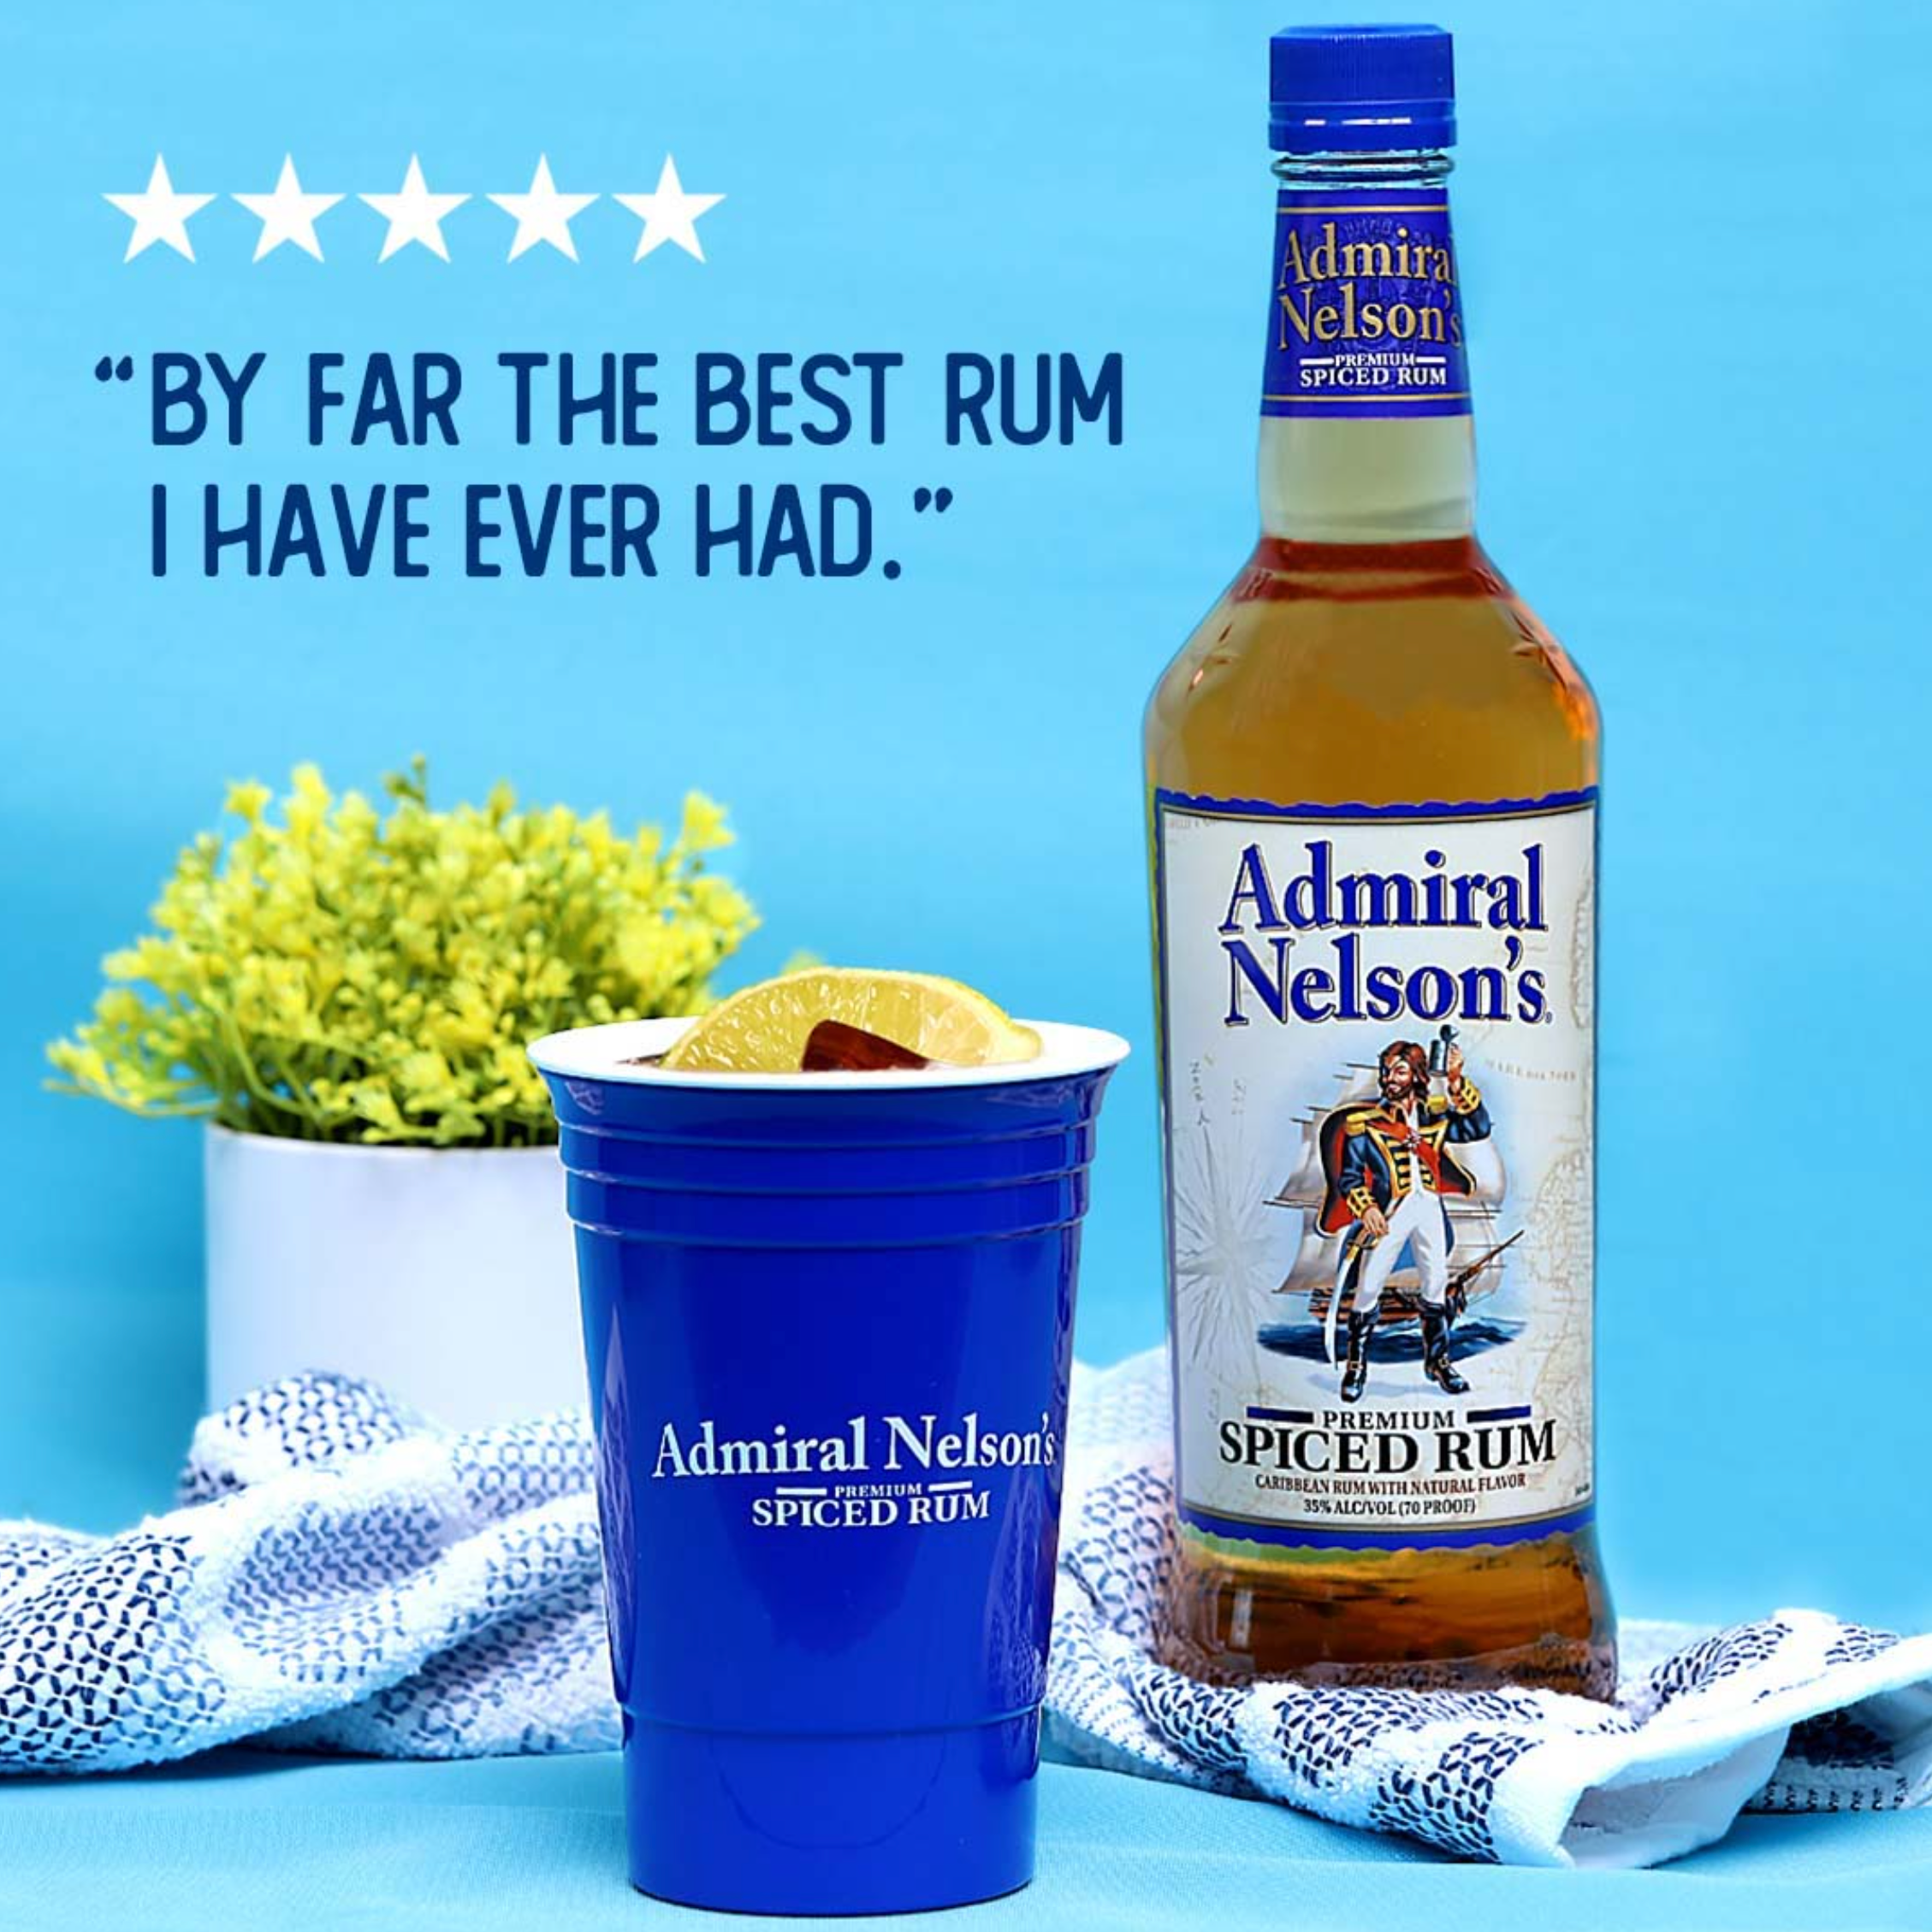 Admiral Nelson's Spiced Rum